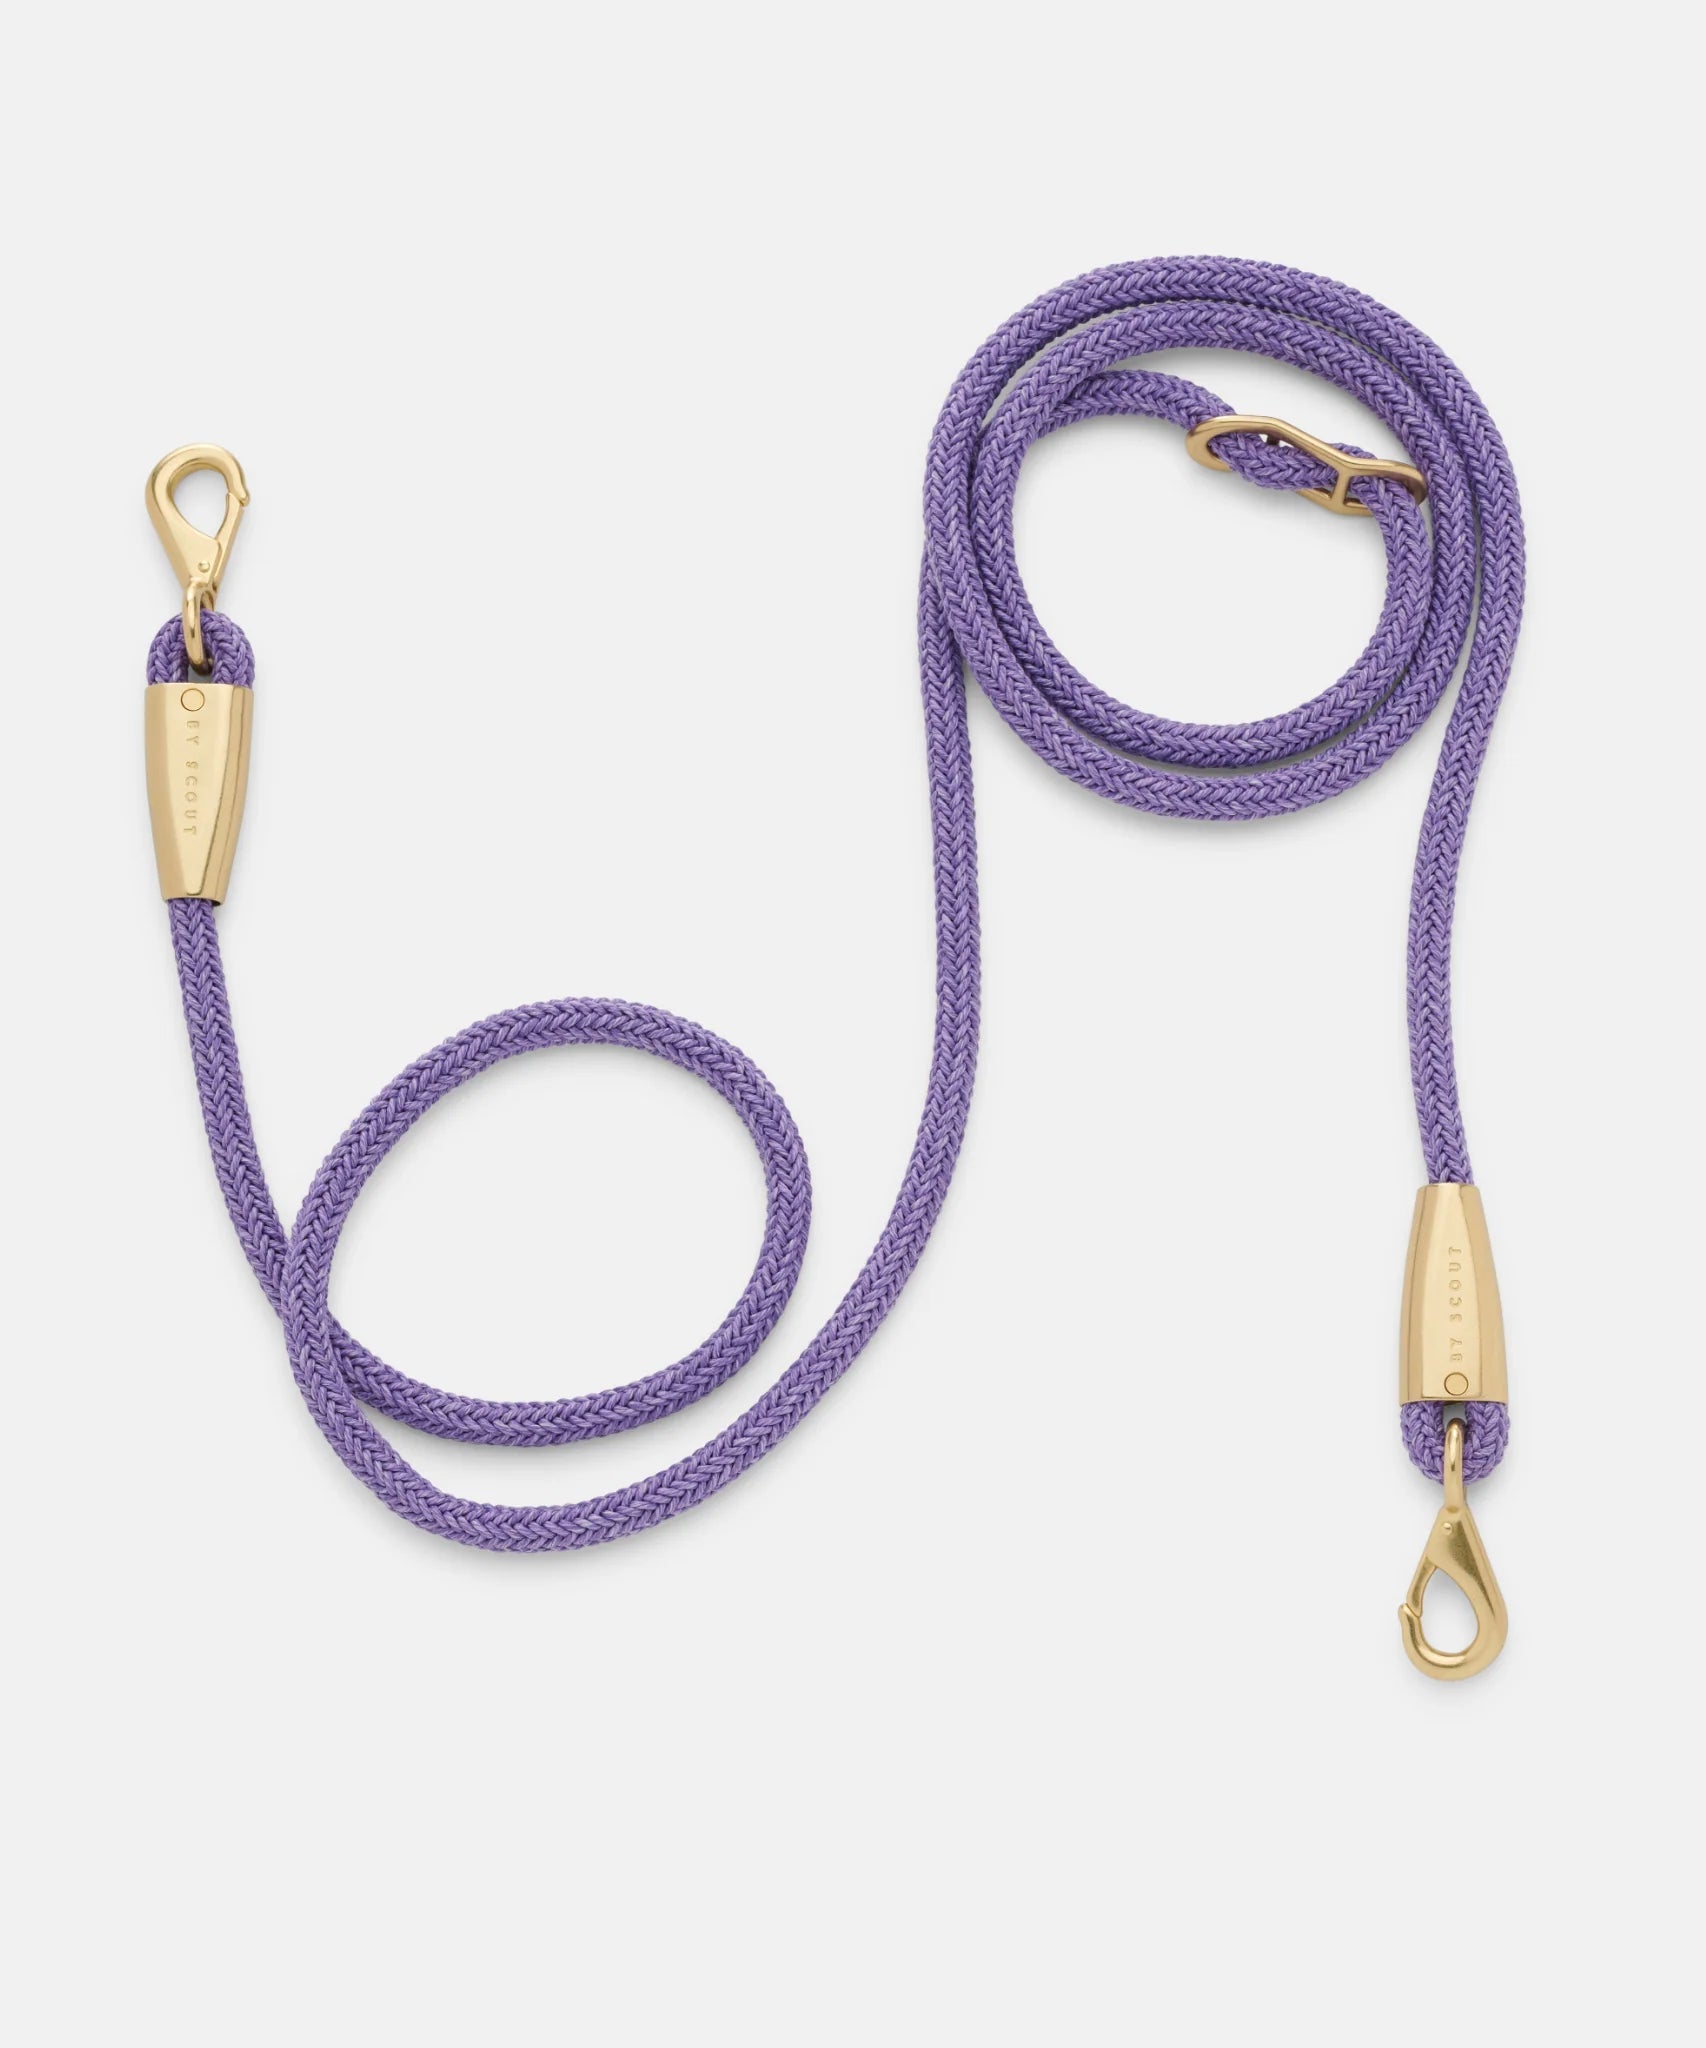 Every Adjustable Rope Leash - Lilac blend